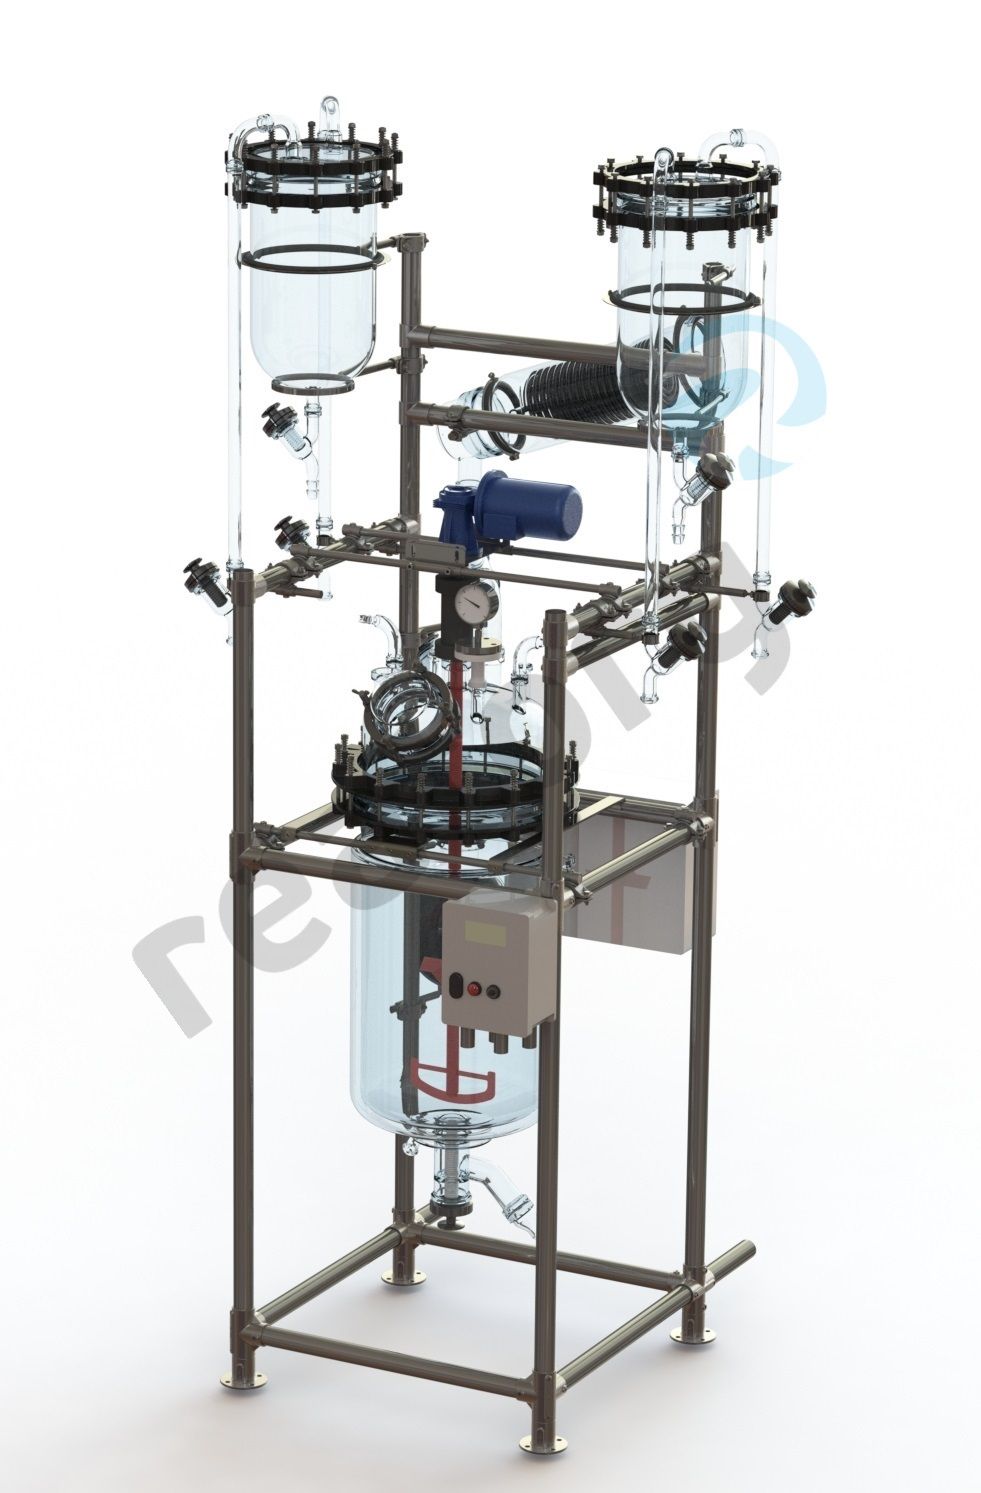 Reactor system Reatorg Technologies™ based on a glass jacketed reactor 100 L